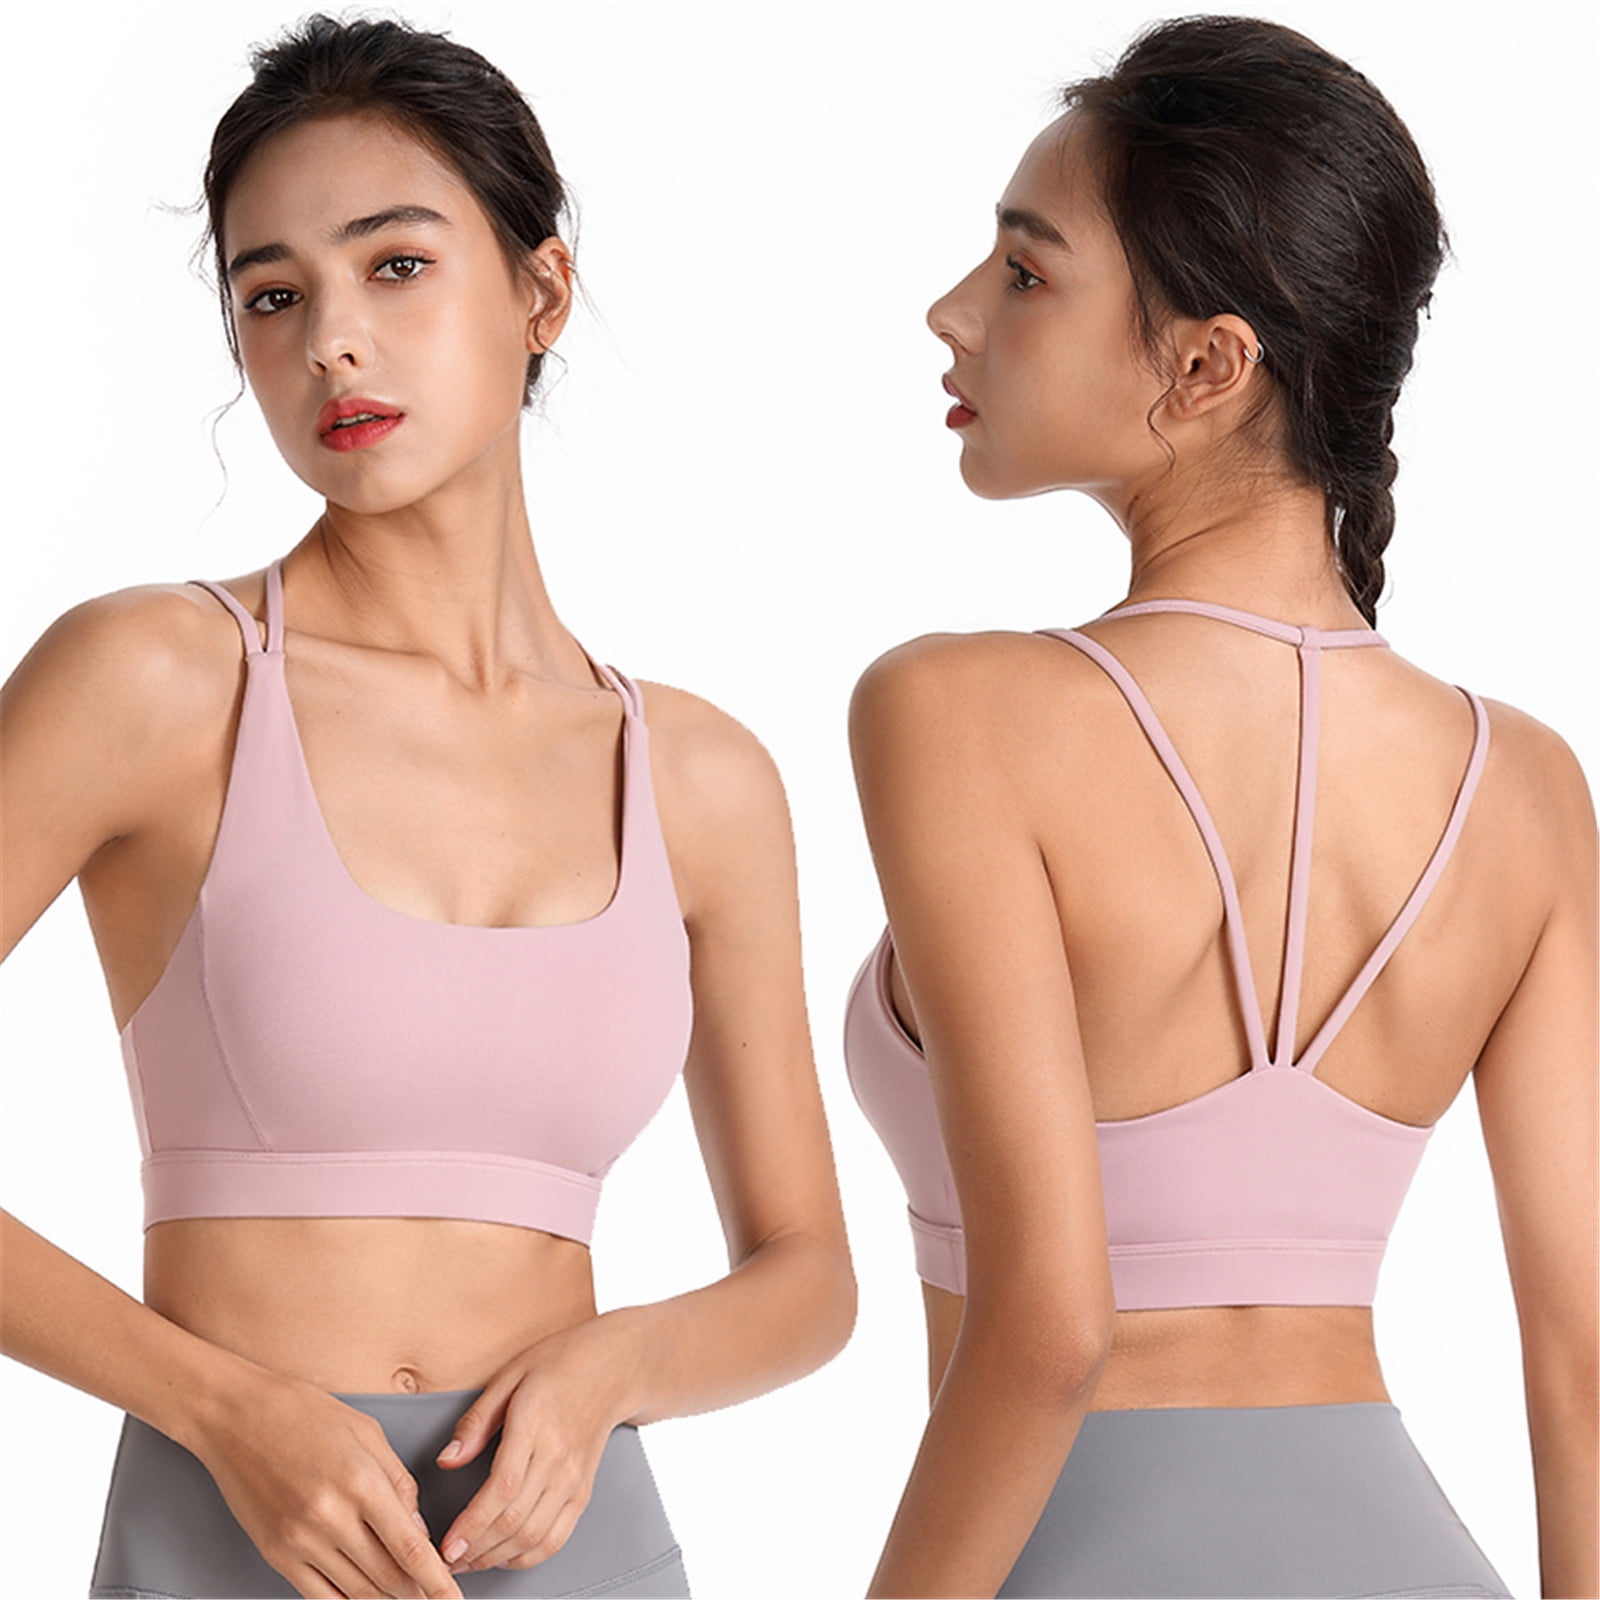 Sports Bras for Women,Clearance Woman Bras With String Quick Dry